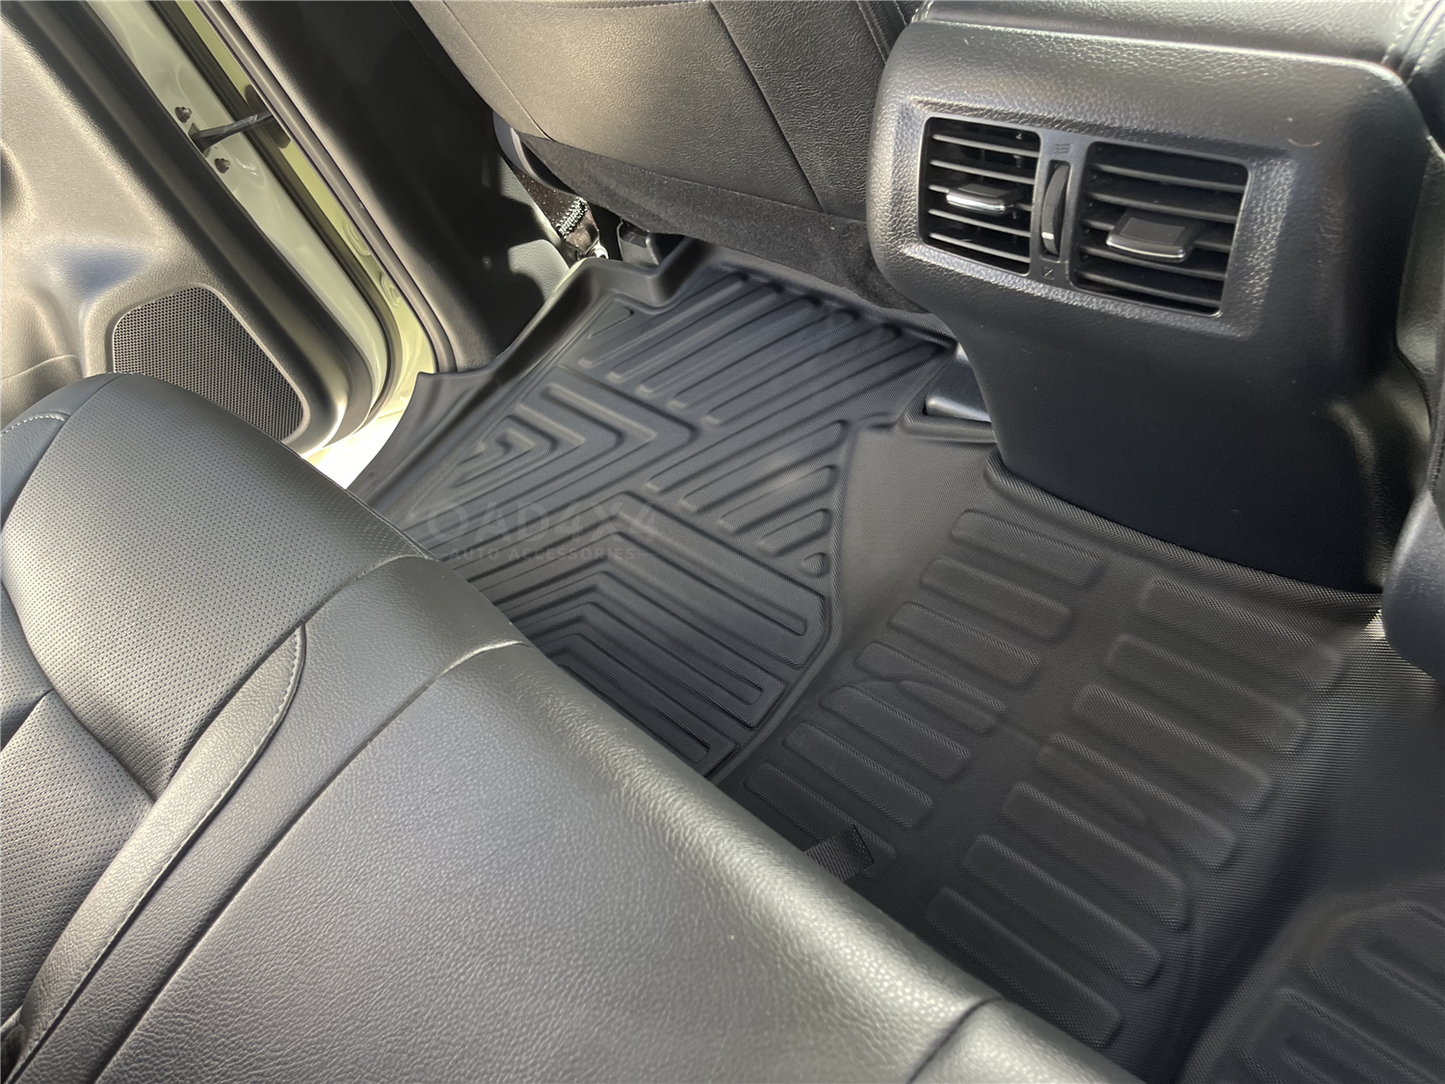 5D TPE Floor Mats & Black Door Sills Protector for Nissan Navara NP300 D23 Dual Cab 2015-Onwards With Cup Holder Tailored Door Sill Covered Car Floor Mat Liner + Stainless Steel Scuff Plates